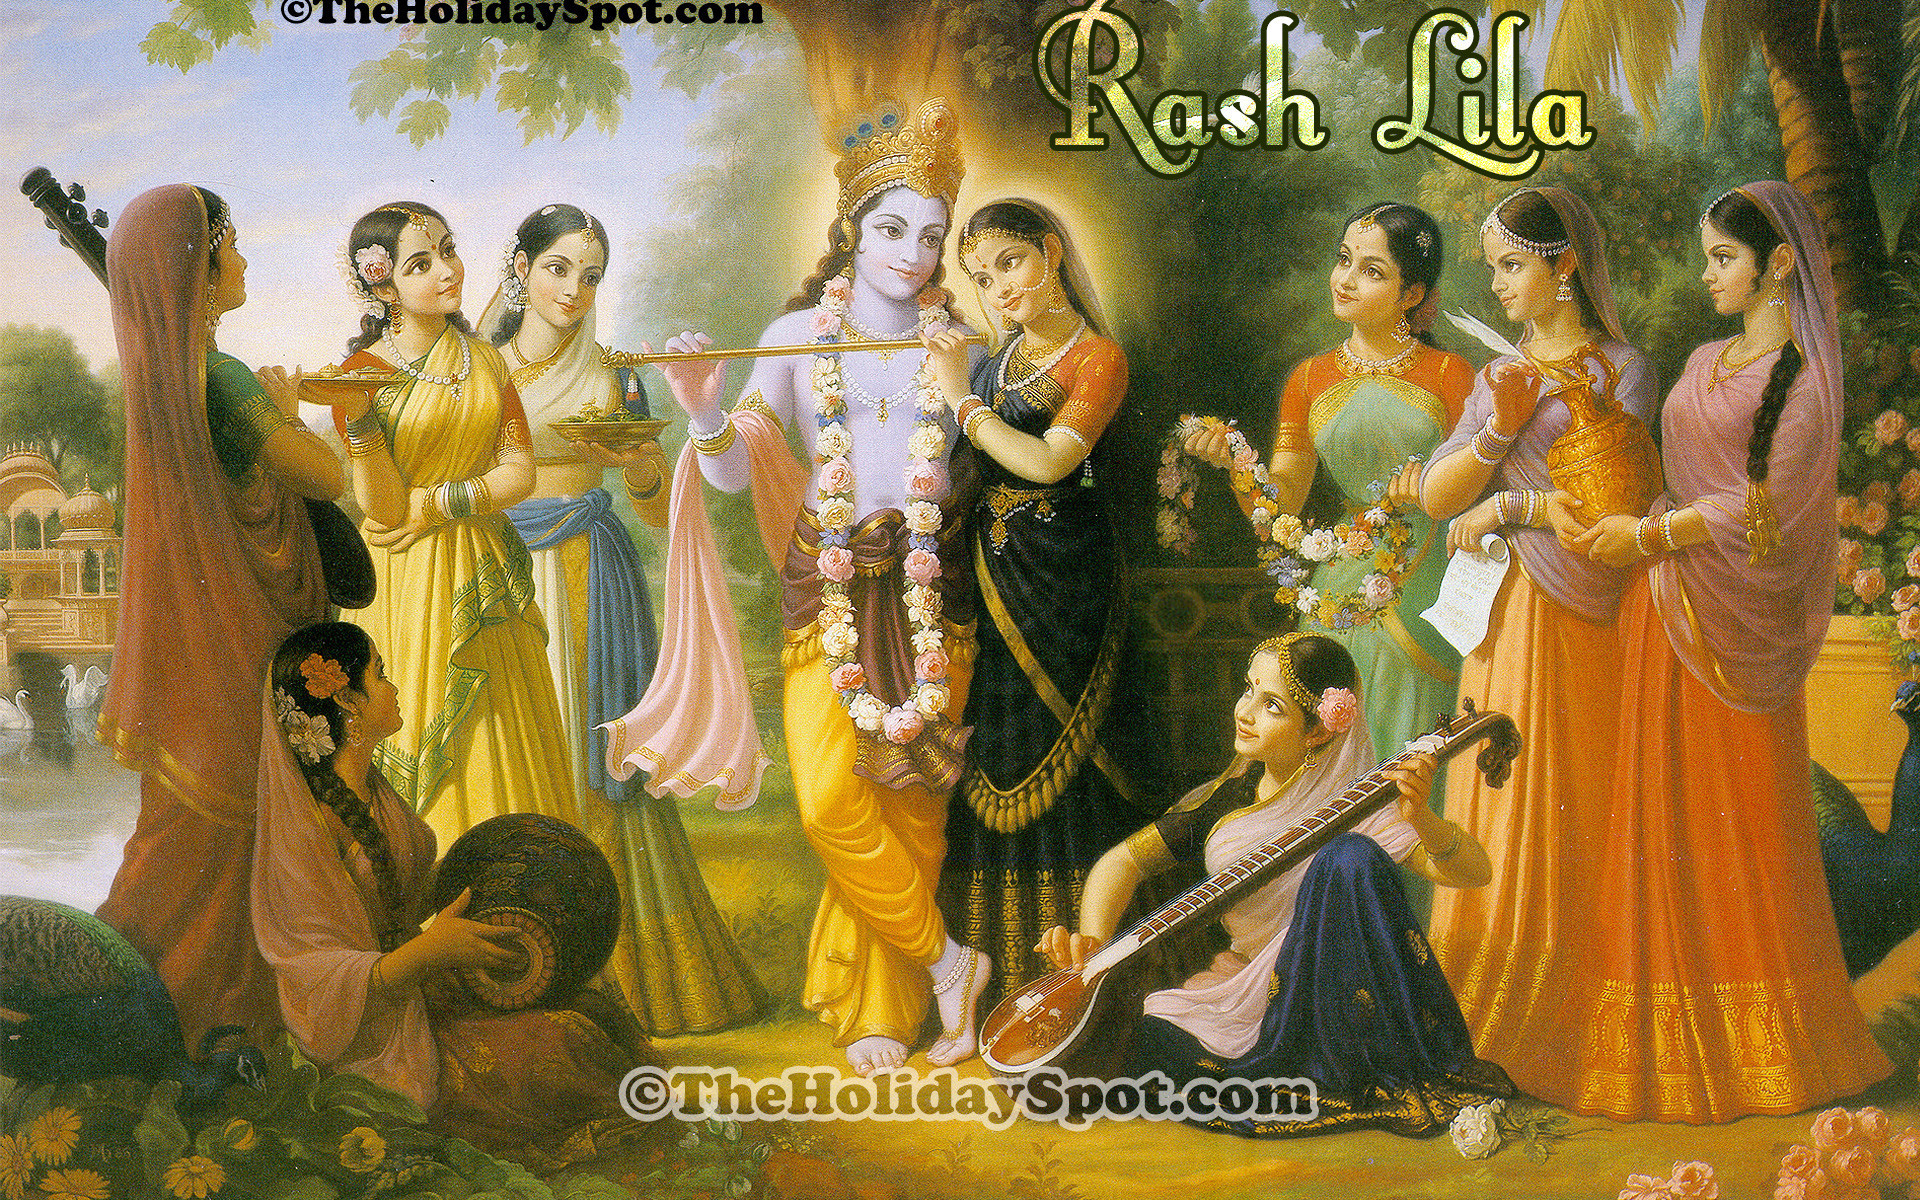 1920x1200  High Definition wallpapers featuring Lord Krishna having rash  lila with the gopis.